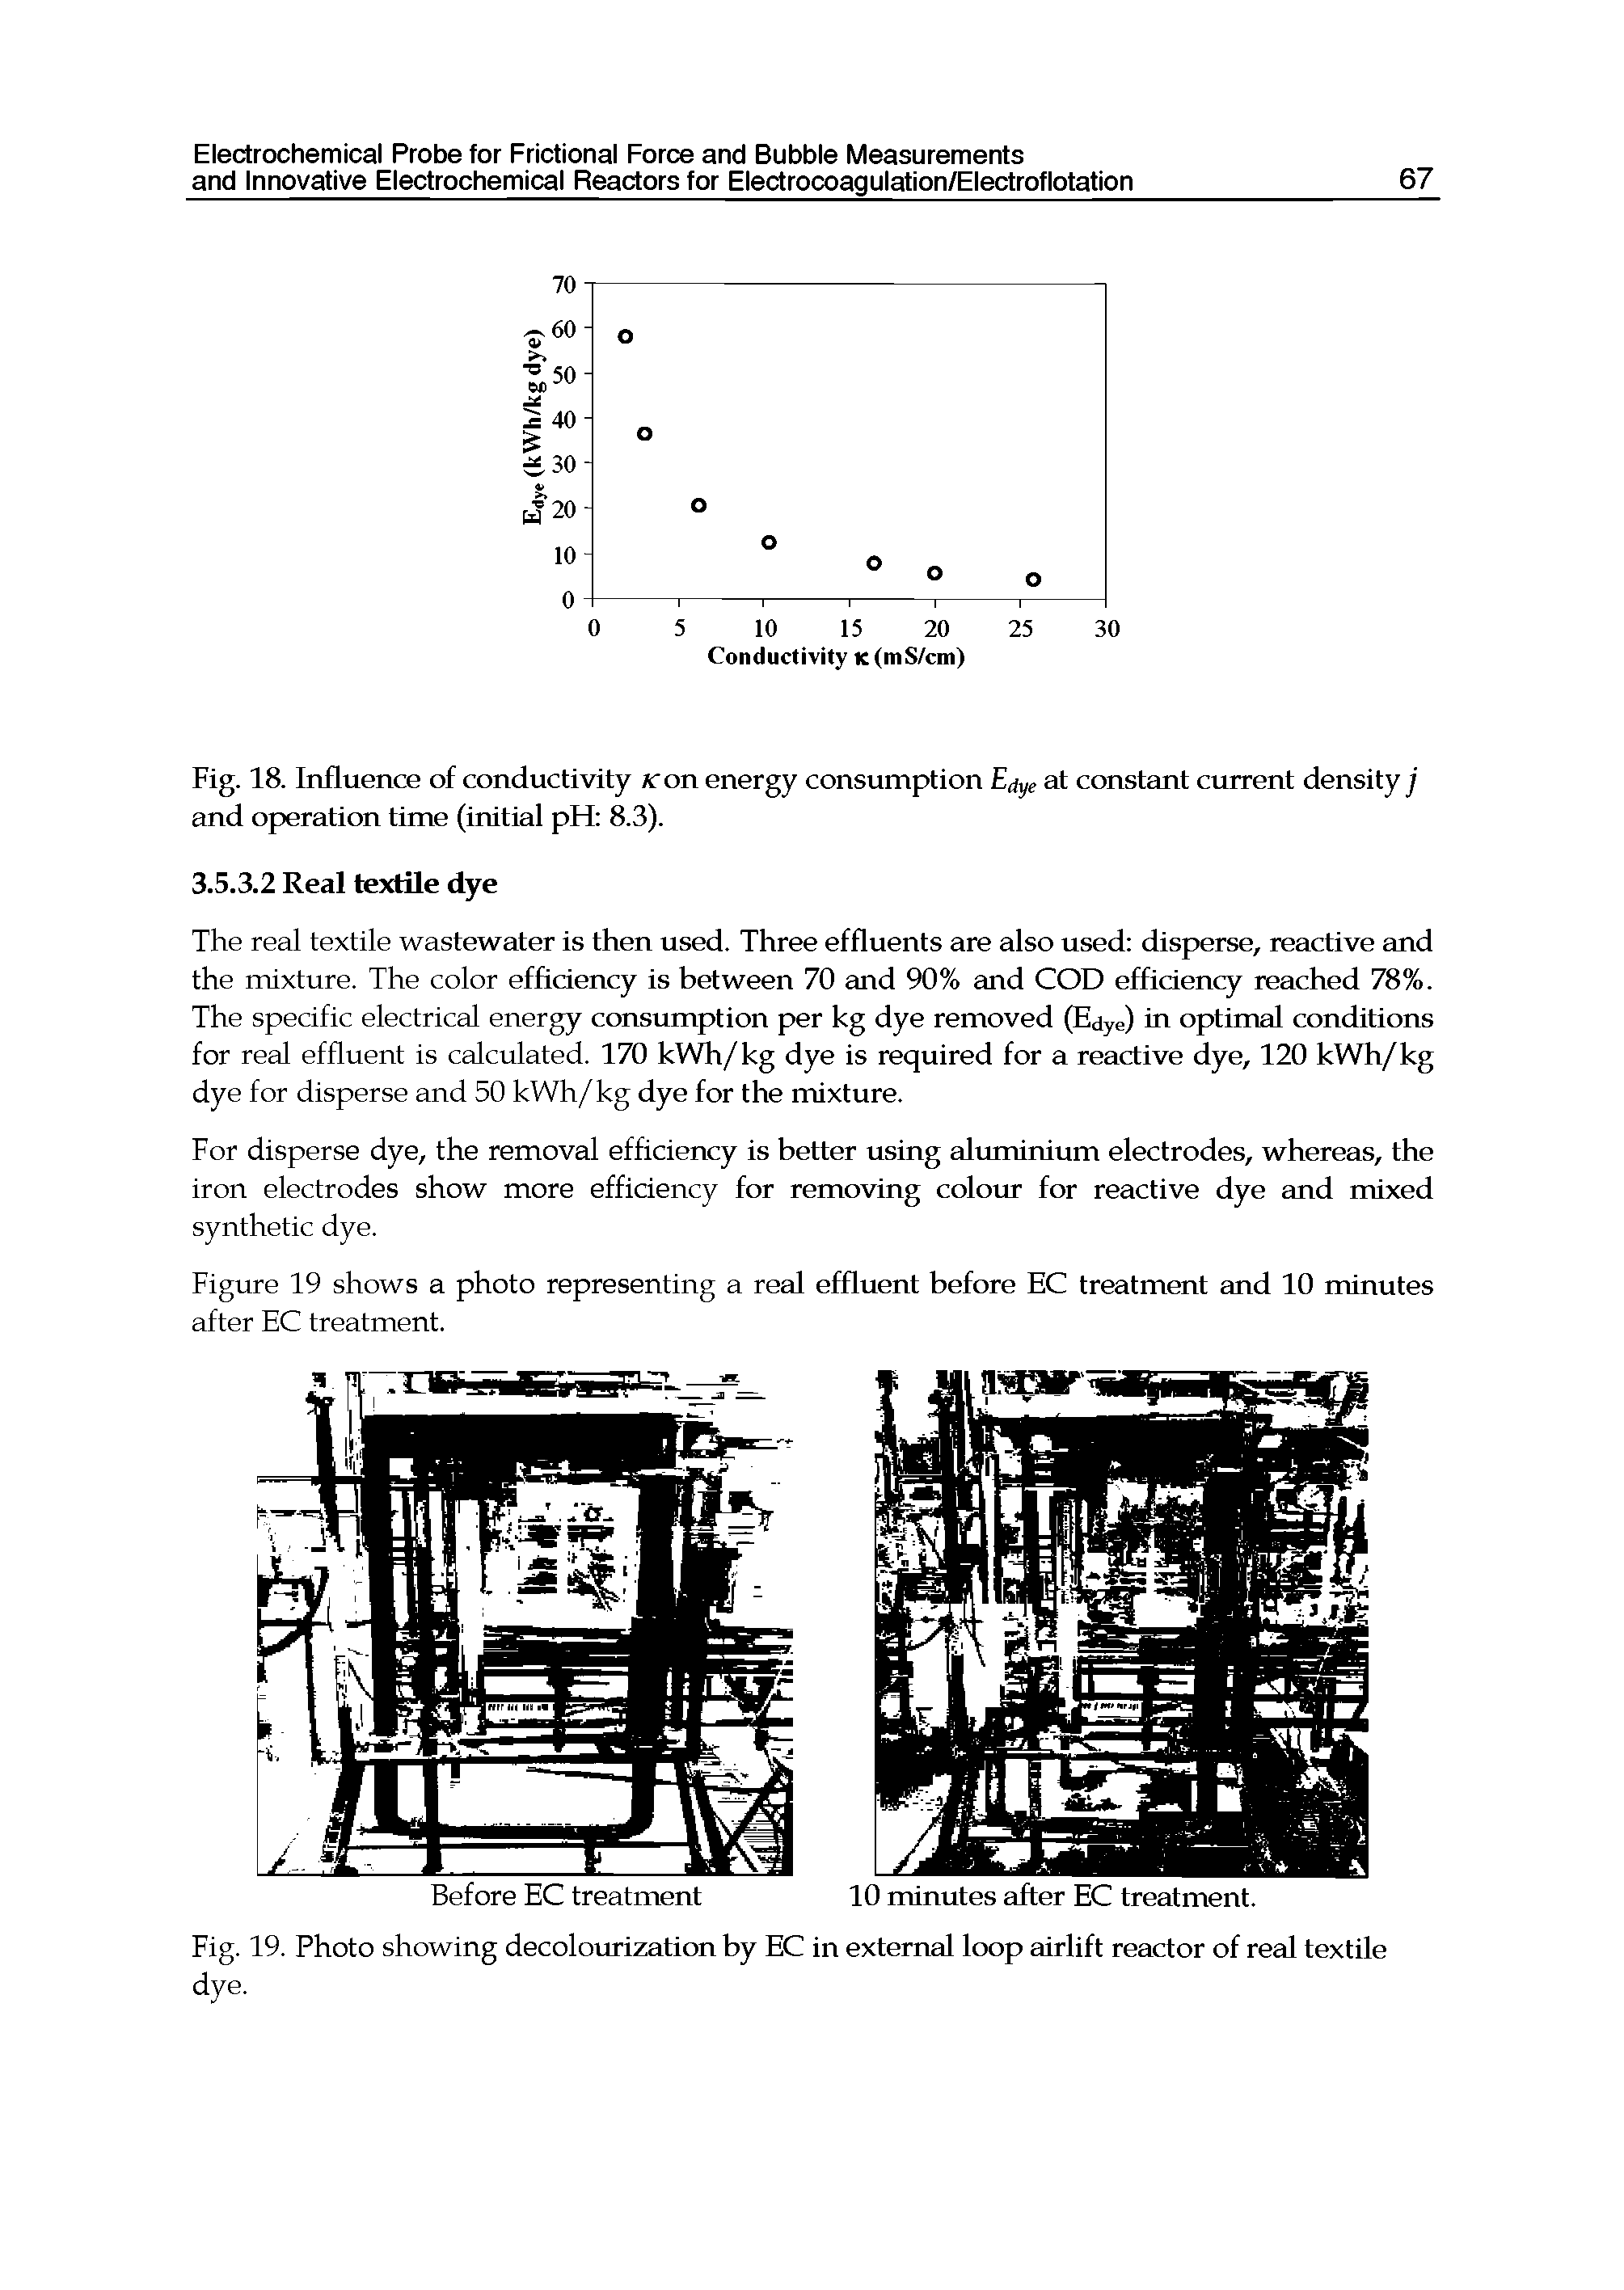 Fig. 19. Photo showing decolourization by EC in external loop airlift reactor of real textile...